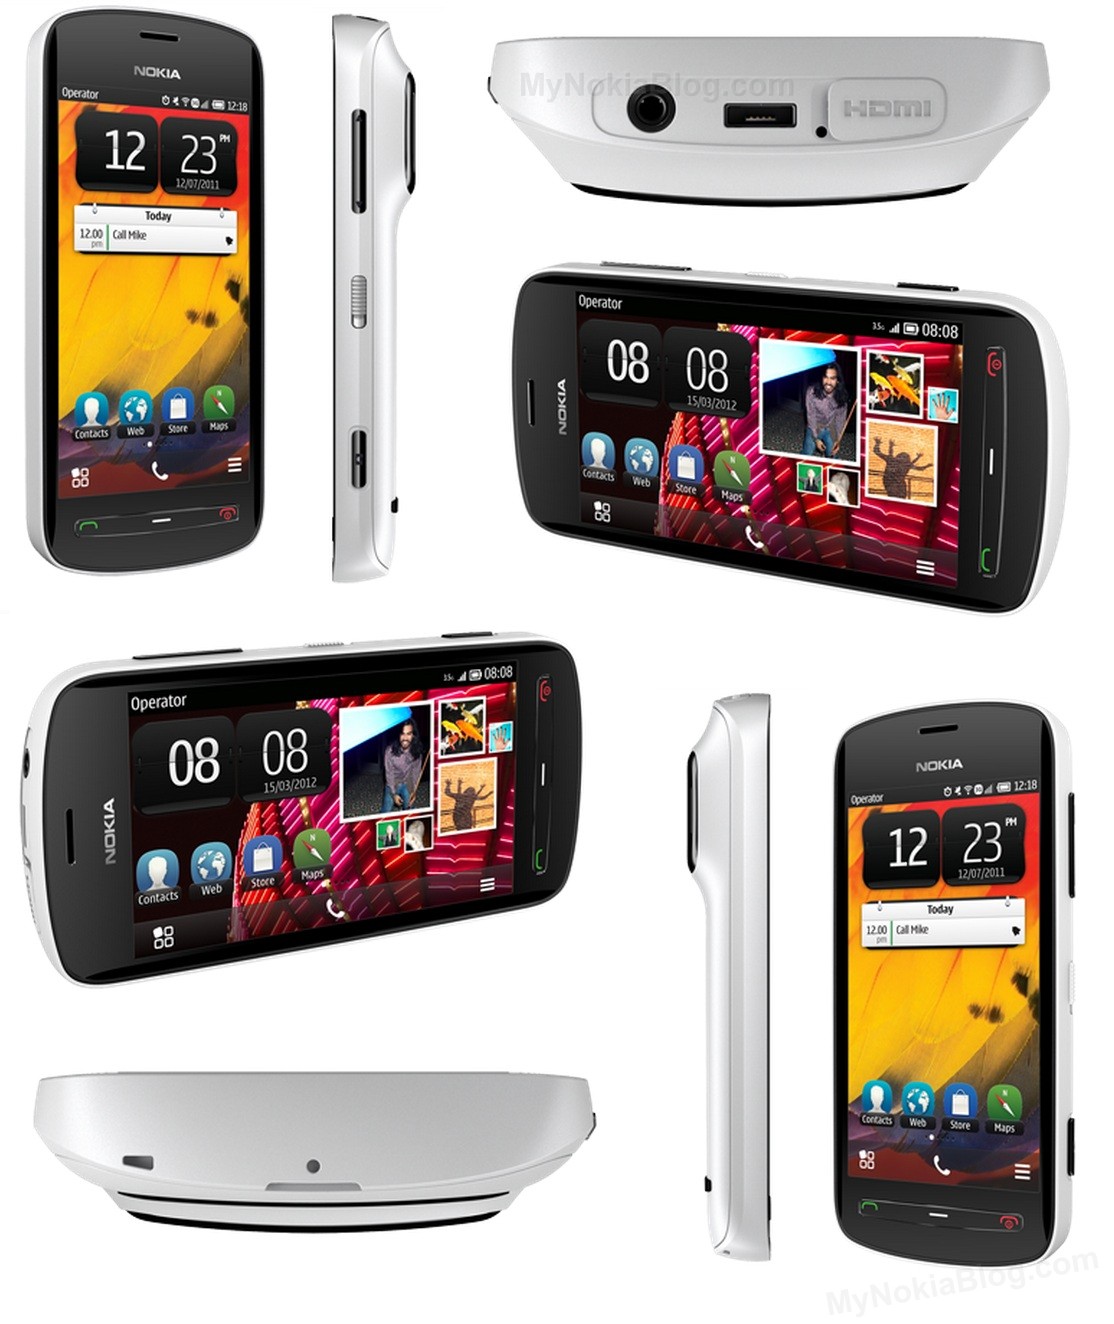 nokia-808-pureview-red-white-black7.jpg